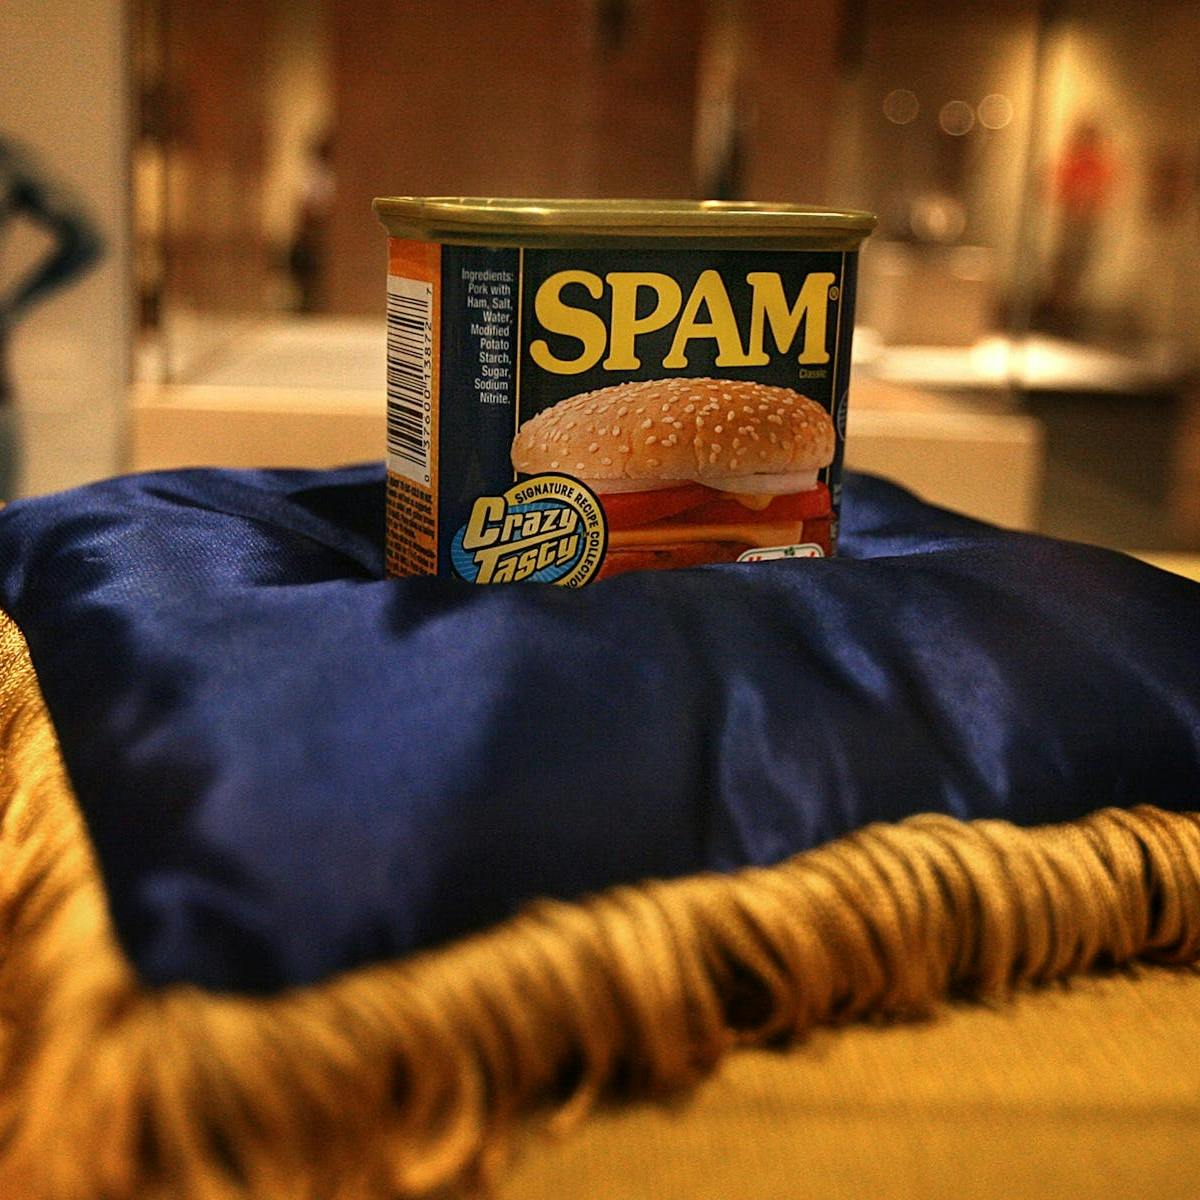 Why did Spam become an international sensation?